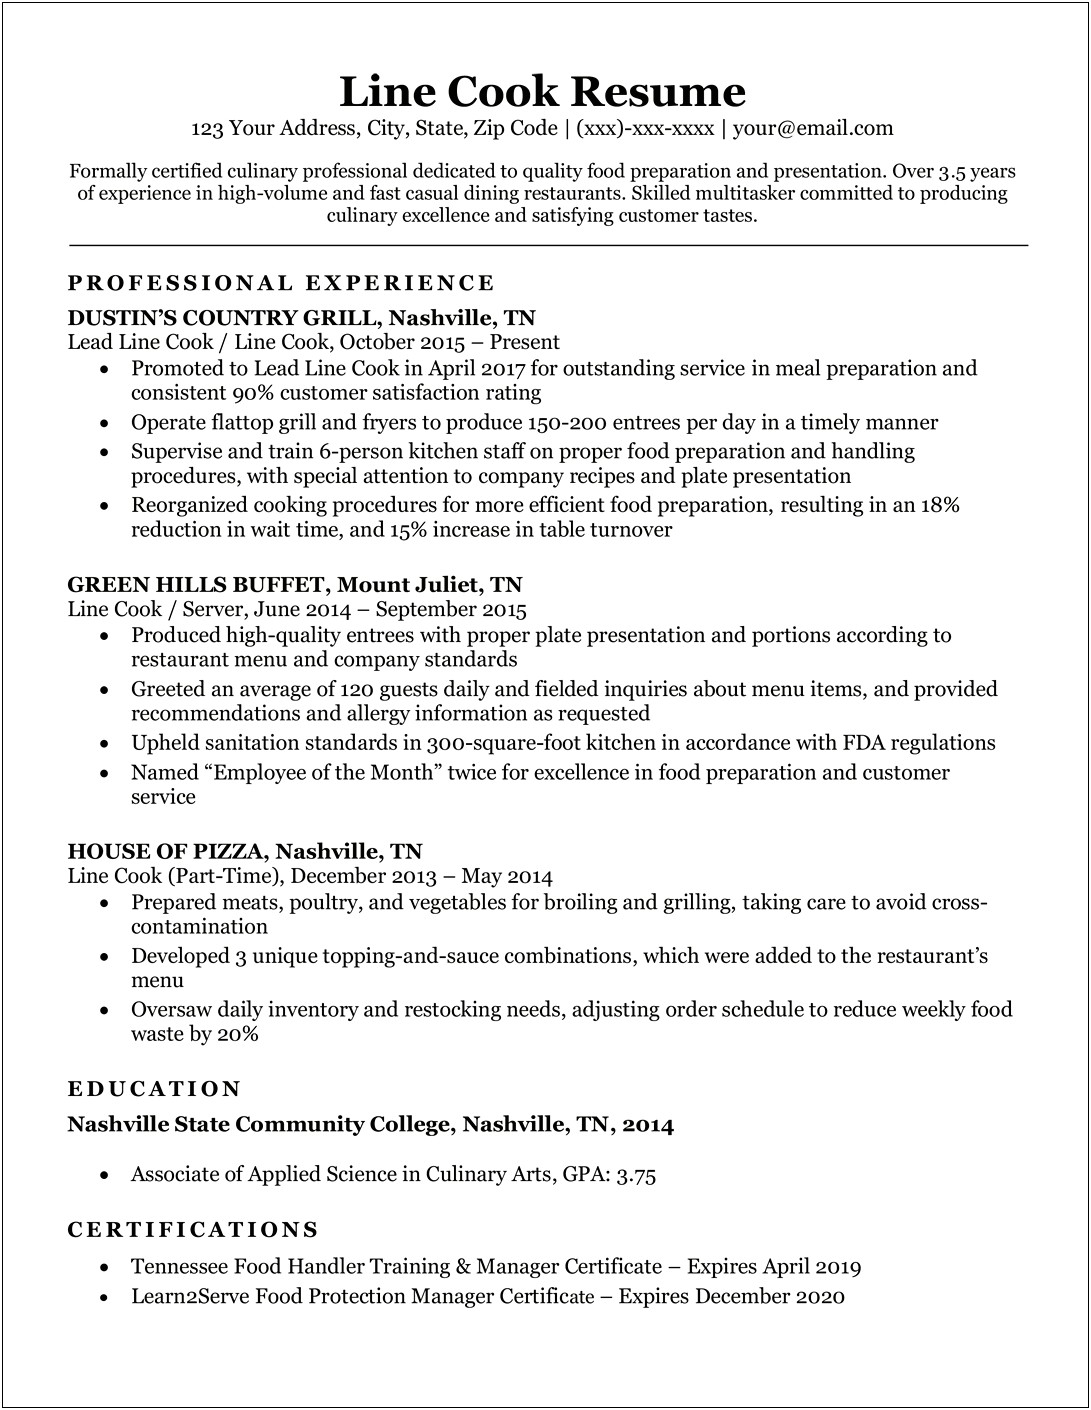 Professional Objective For Culinary Resume